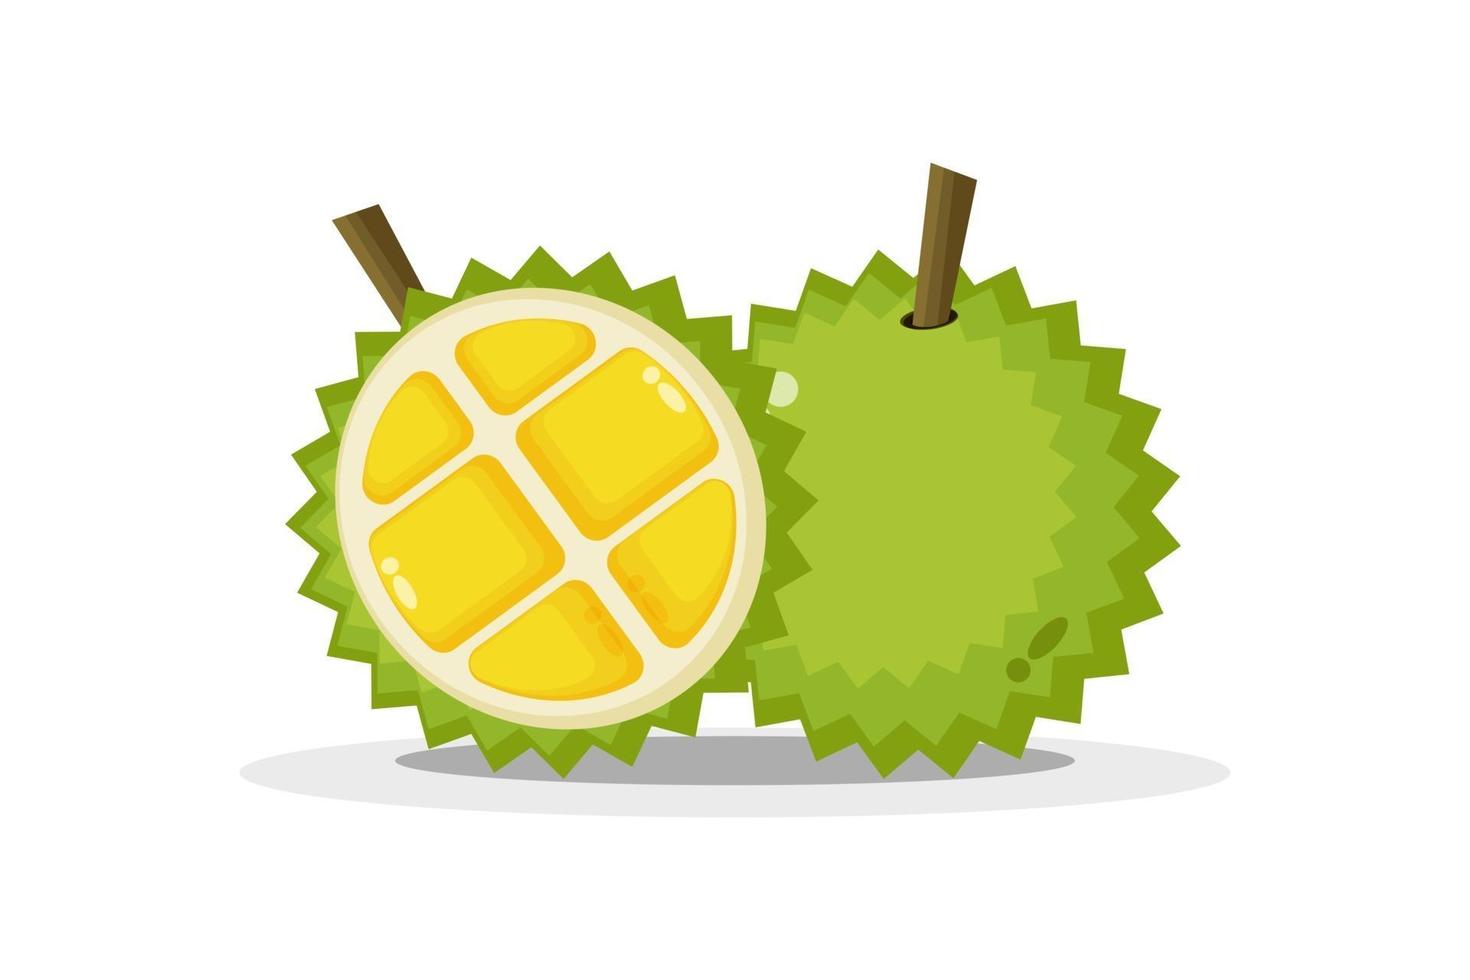 Durian and durian slices vector